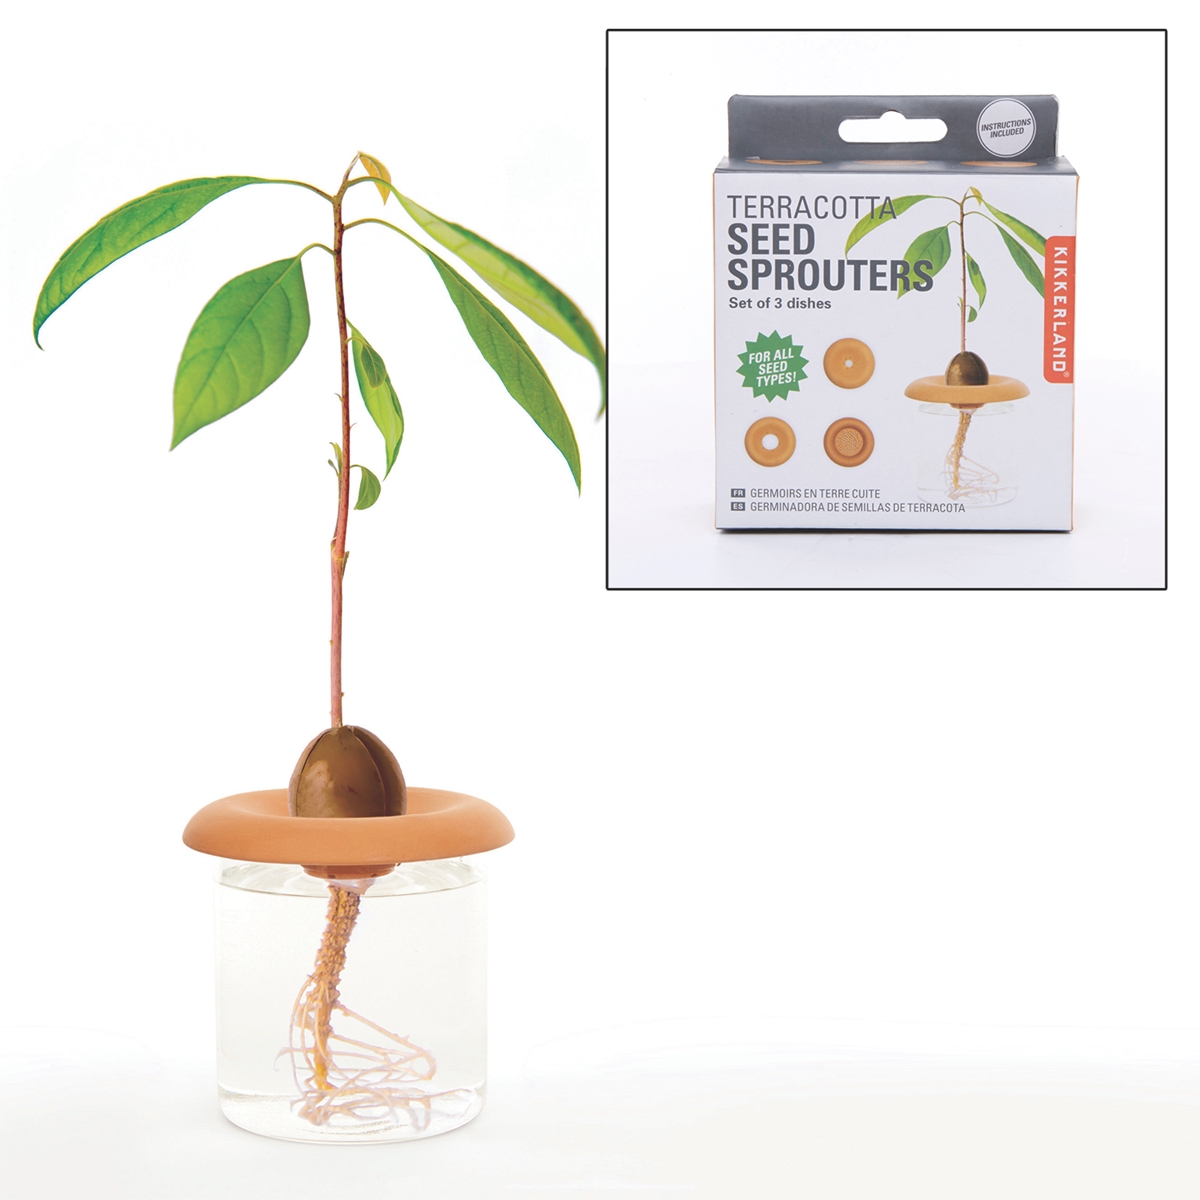 Terracotta Seed Sprouters